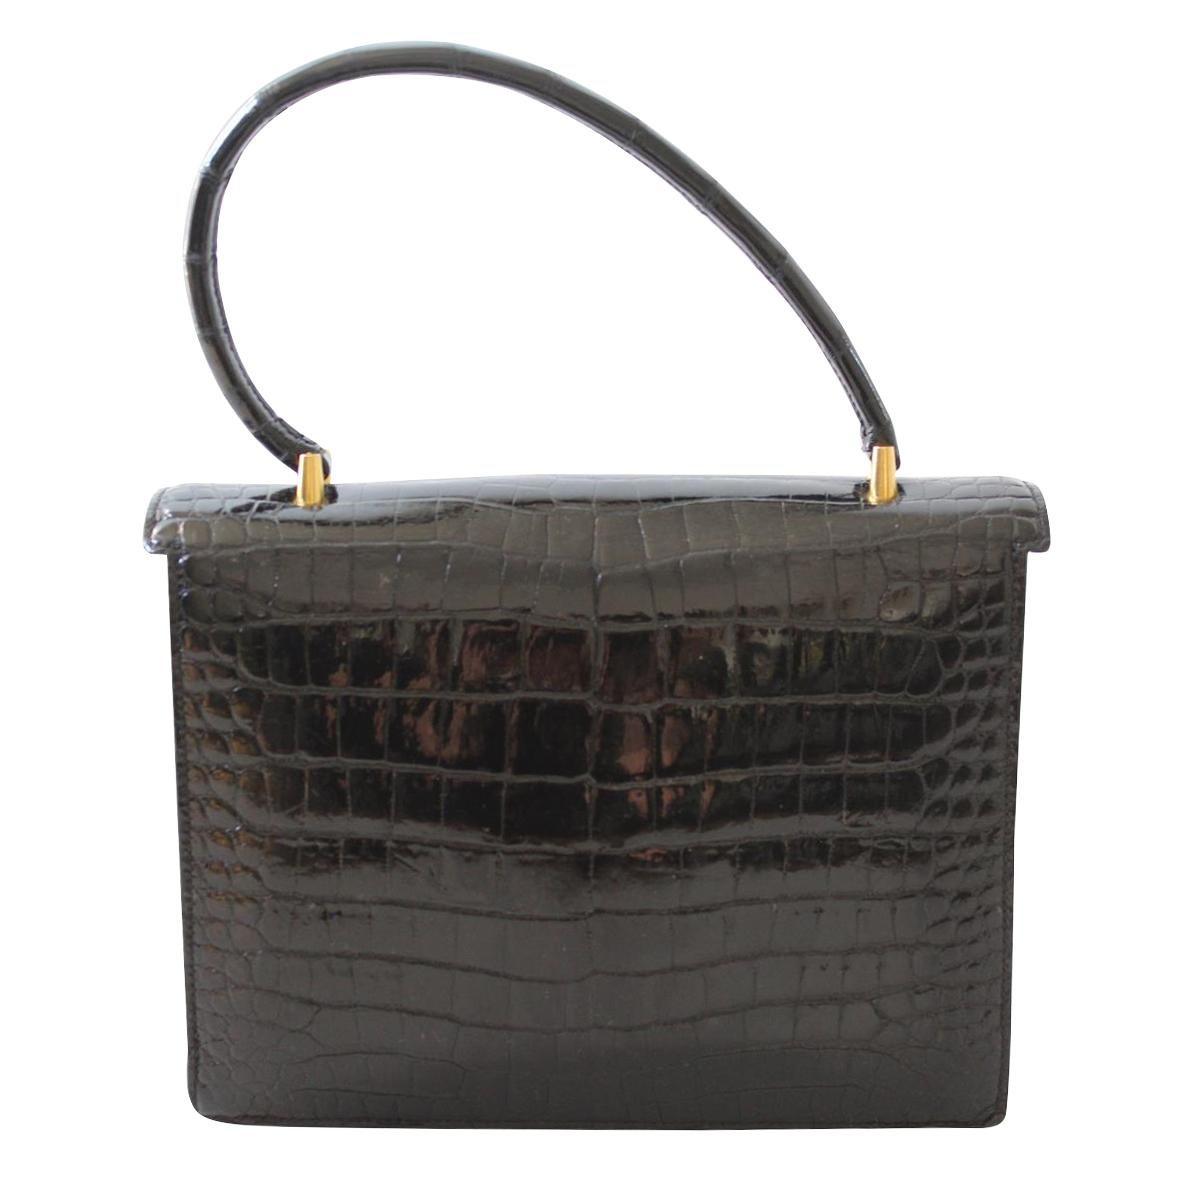 Fantastic Hermès bag
Vintage
'60s period
Real crocodile leather
Black color
Single handle
Golden metal
Two internal compartments
Four pockets
Cm 24 x 18 x 6 (9.4 x 7 x 2.3 inches)
With dustbag
Worldwide express shipping included in the price !